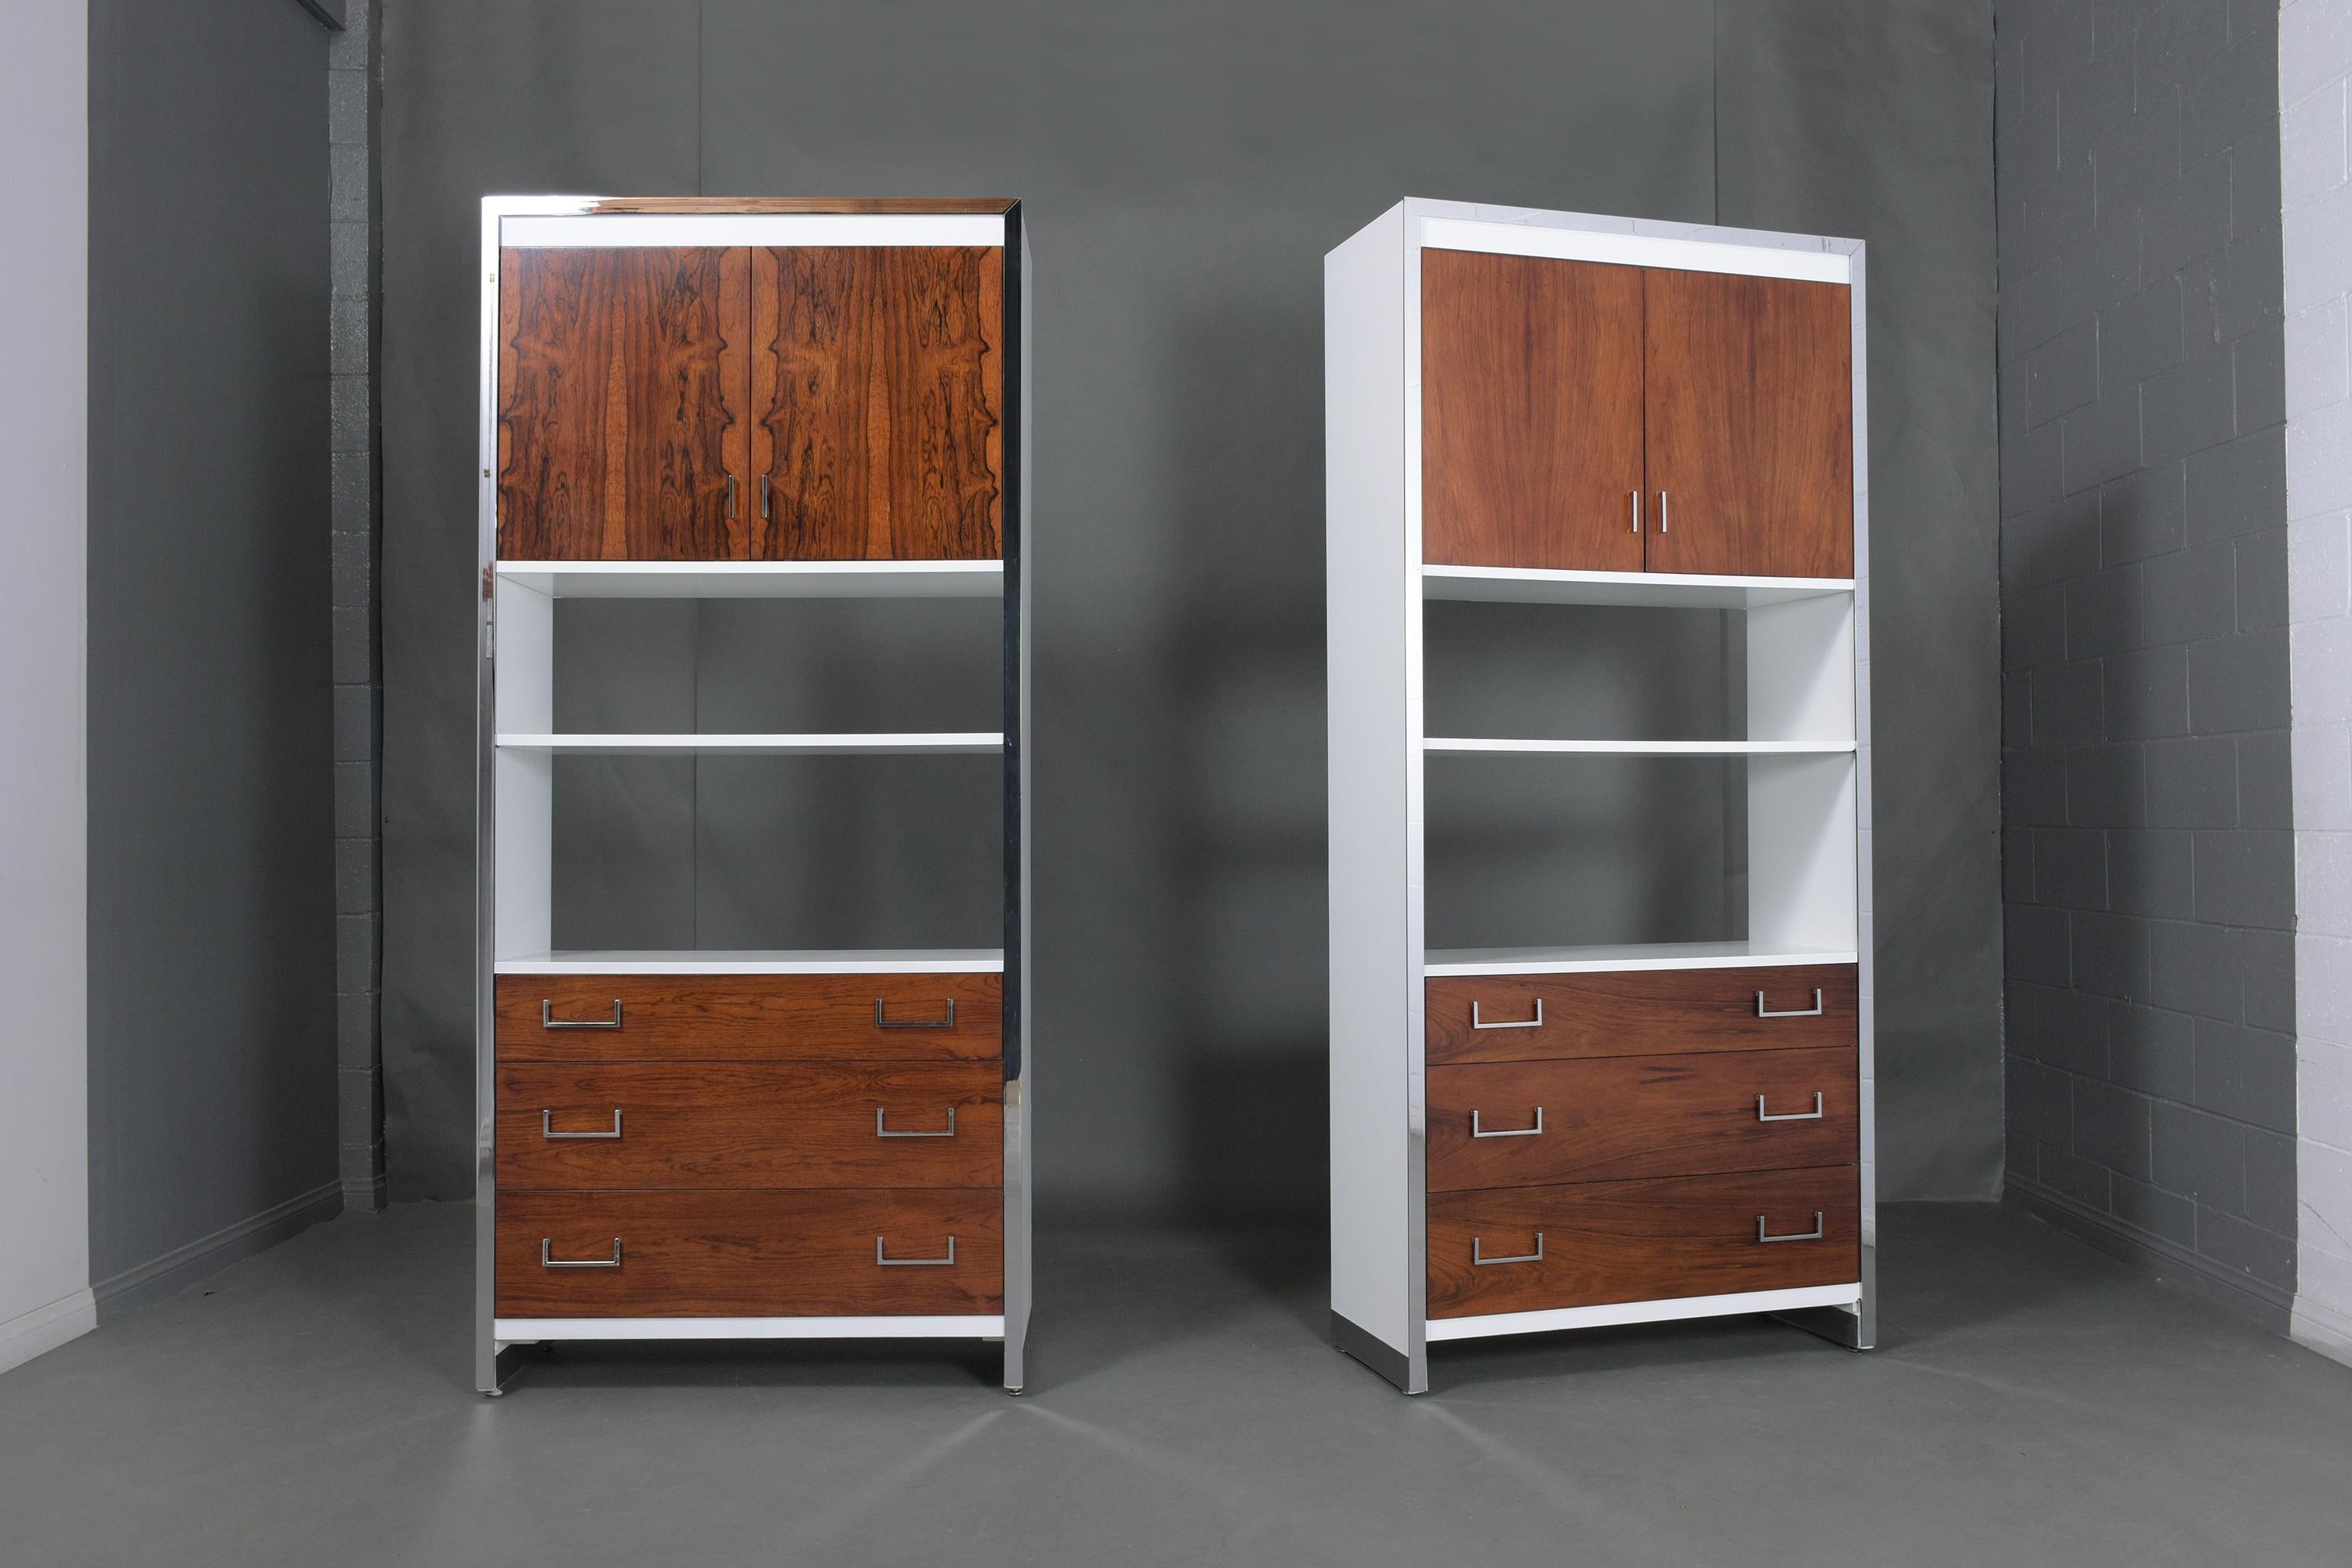 An extraordinary pair of mid-century bookcases hand-crafted out of rosewood this set has been professionally restored by our team of craftsmen. This 1960s bookshelf features a beautiful rosewood and white color combination with a lacquered finish